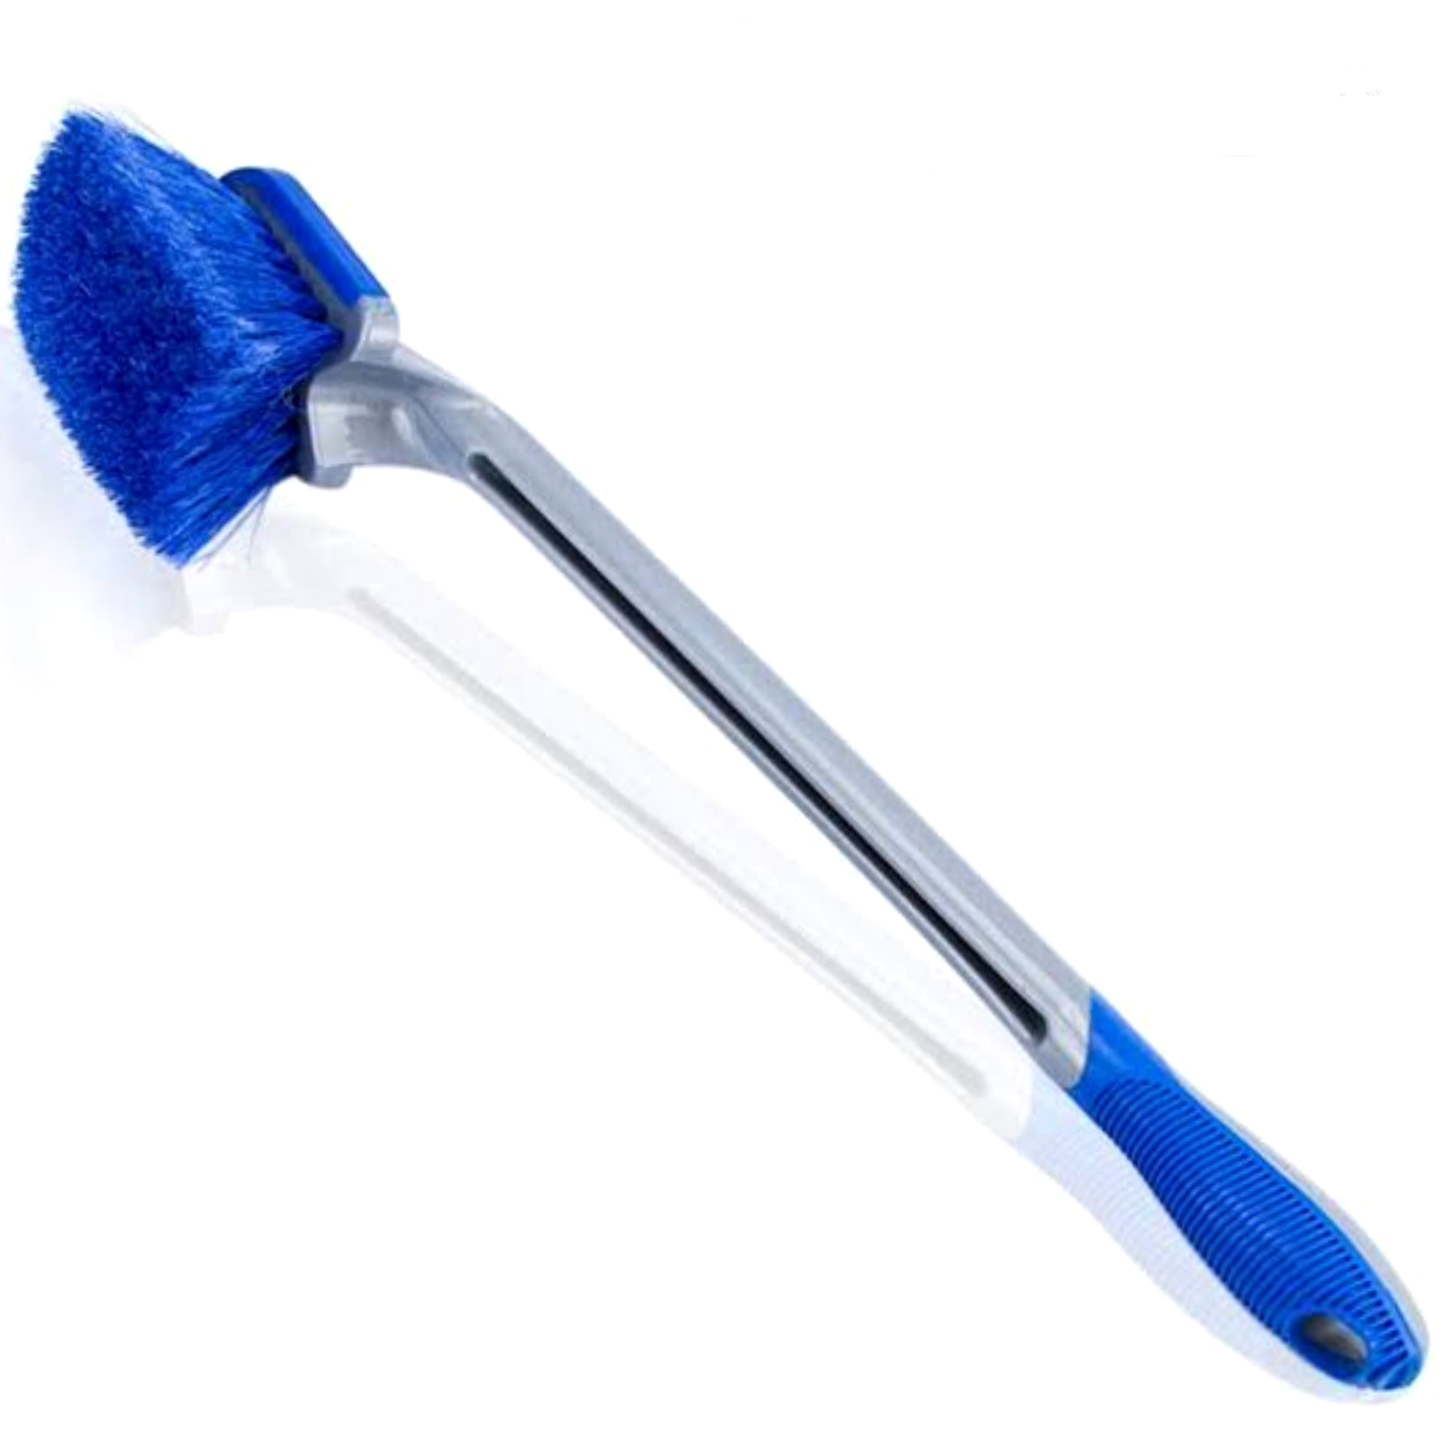 Refract Premium Car Care Products Refract Long Handle Soft Wheel Cleaning Brush